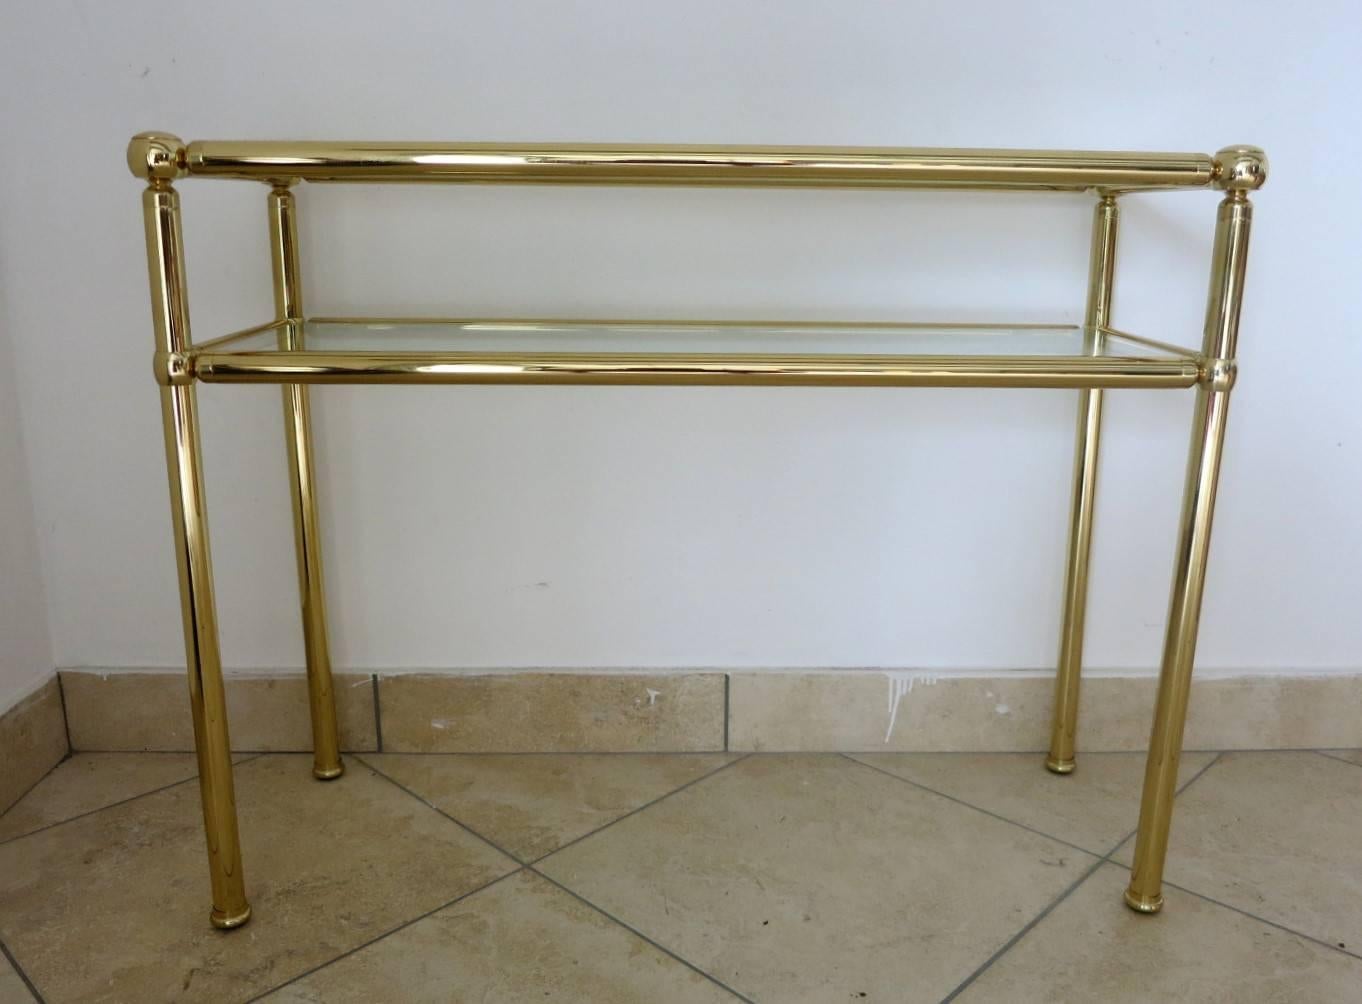 Italian mid-century brass console table / Made in Italy in the 1950’s
Length: 38.5 inches / Width: 14 inches / Height: 30 inches
3 in stock in Palm Springs ON FINAL CLEARANCE SALE for $1,199 each!!!
Order Reference #: FABIOLTD F2